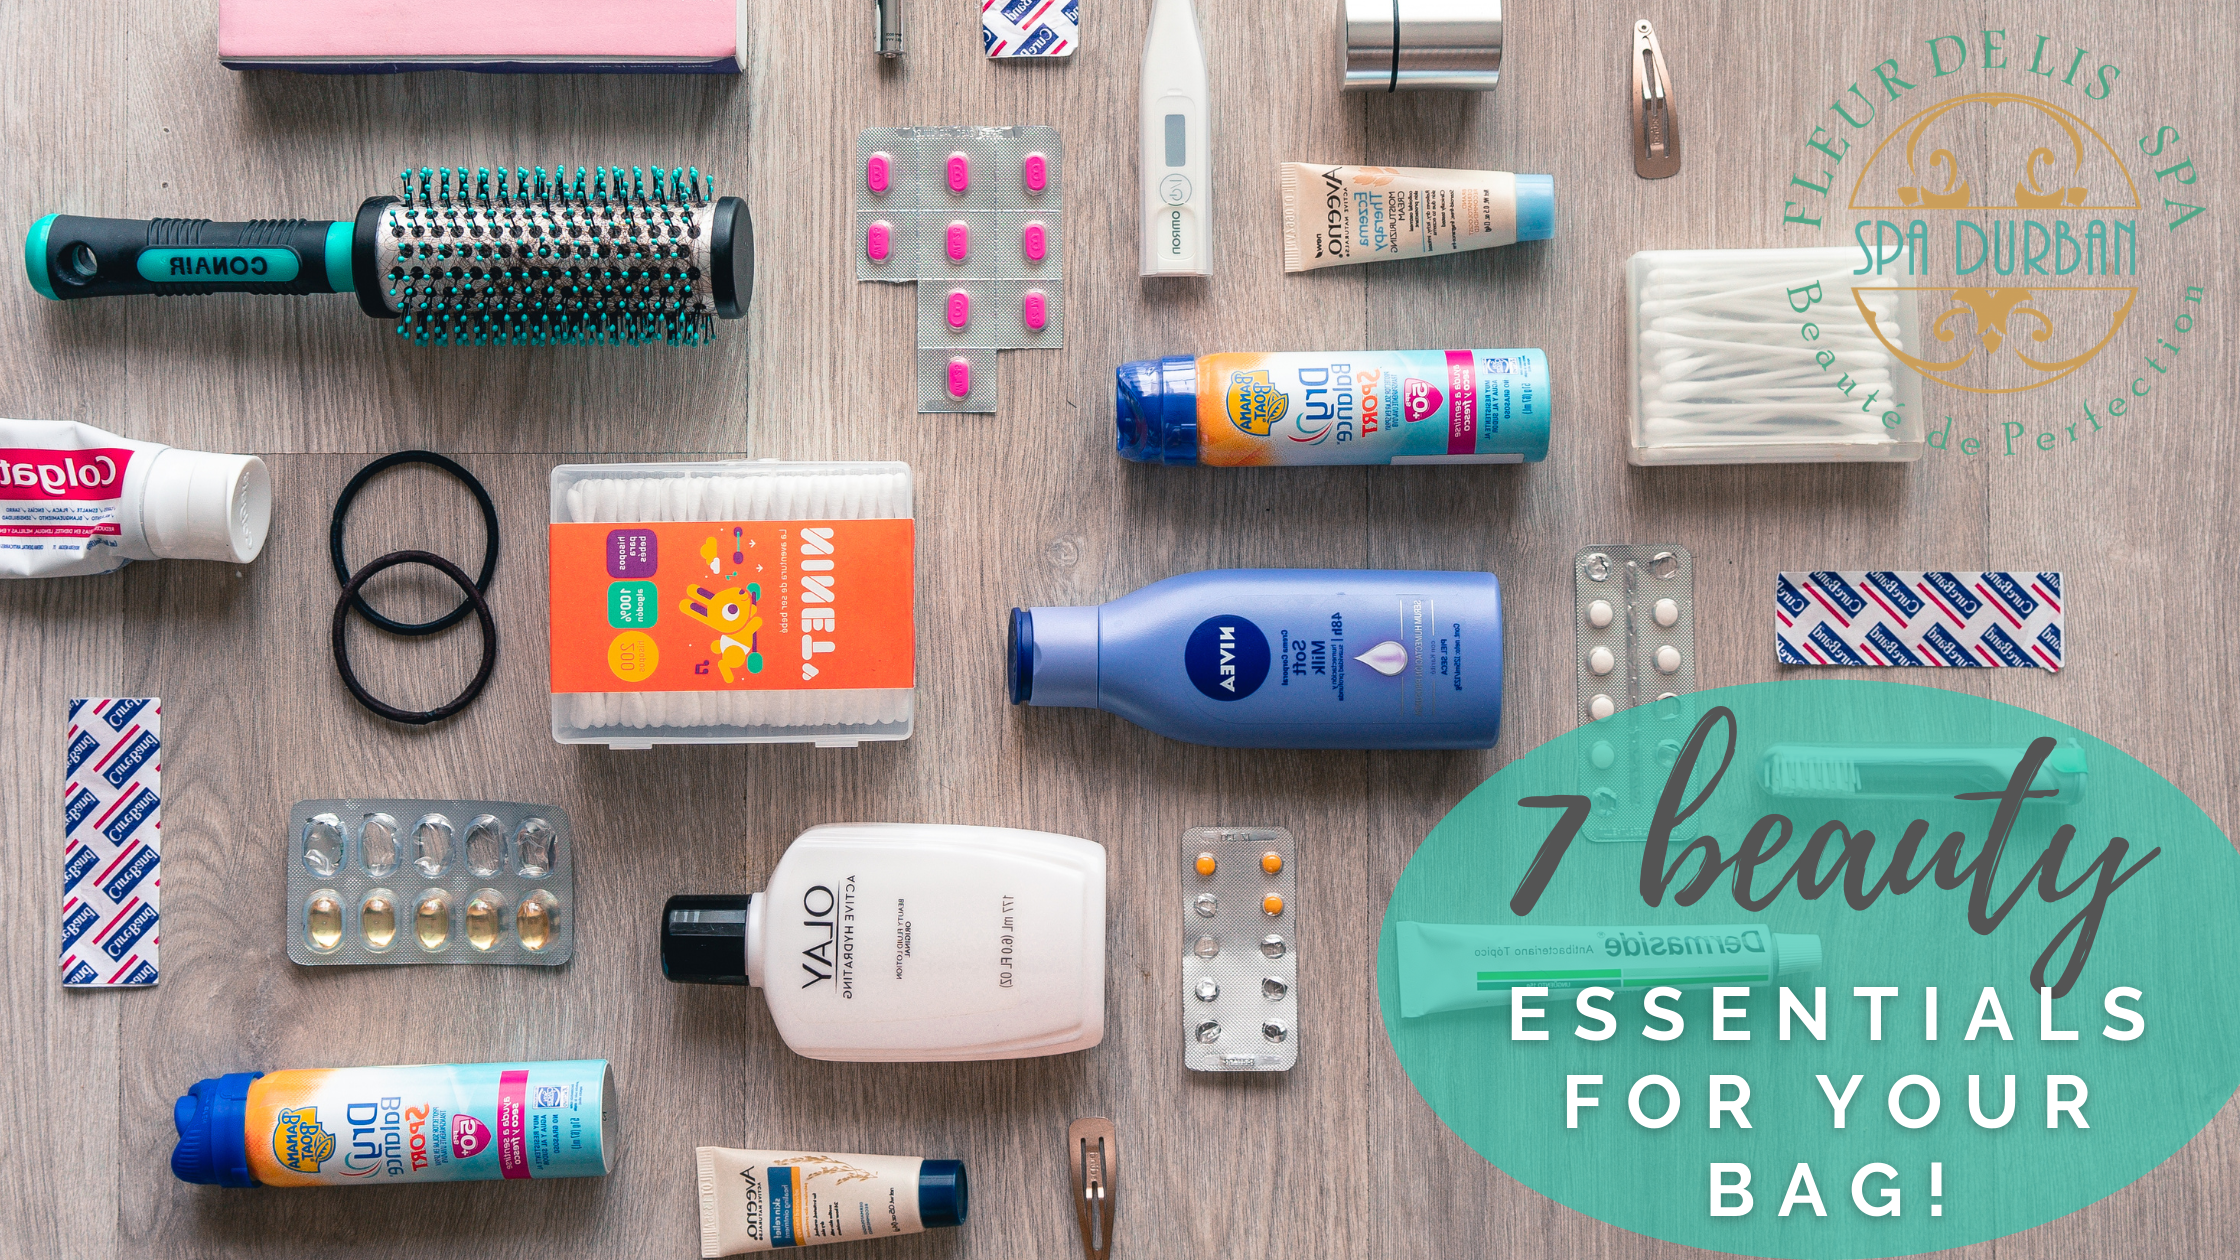 7 Beauty Essentials for Your Bag